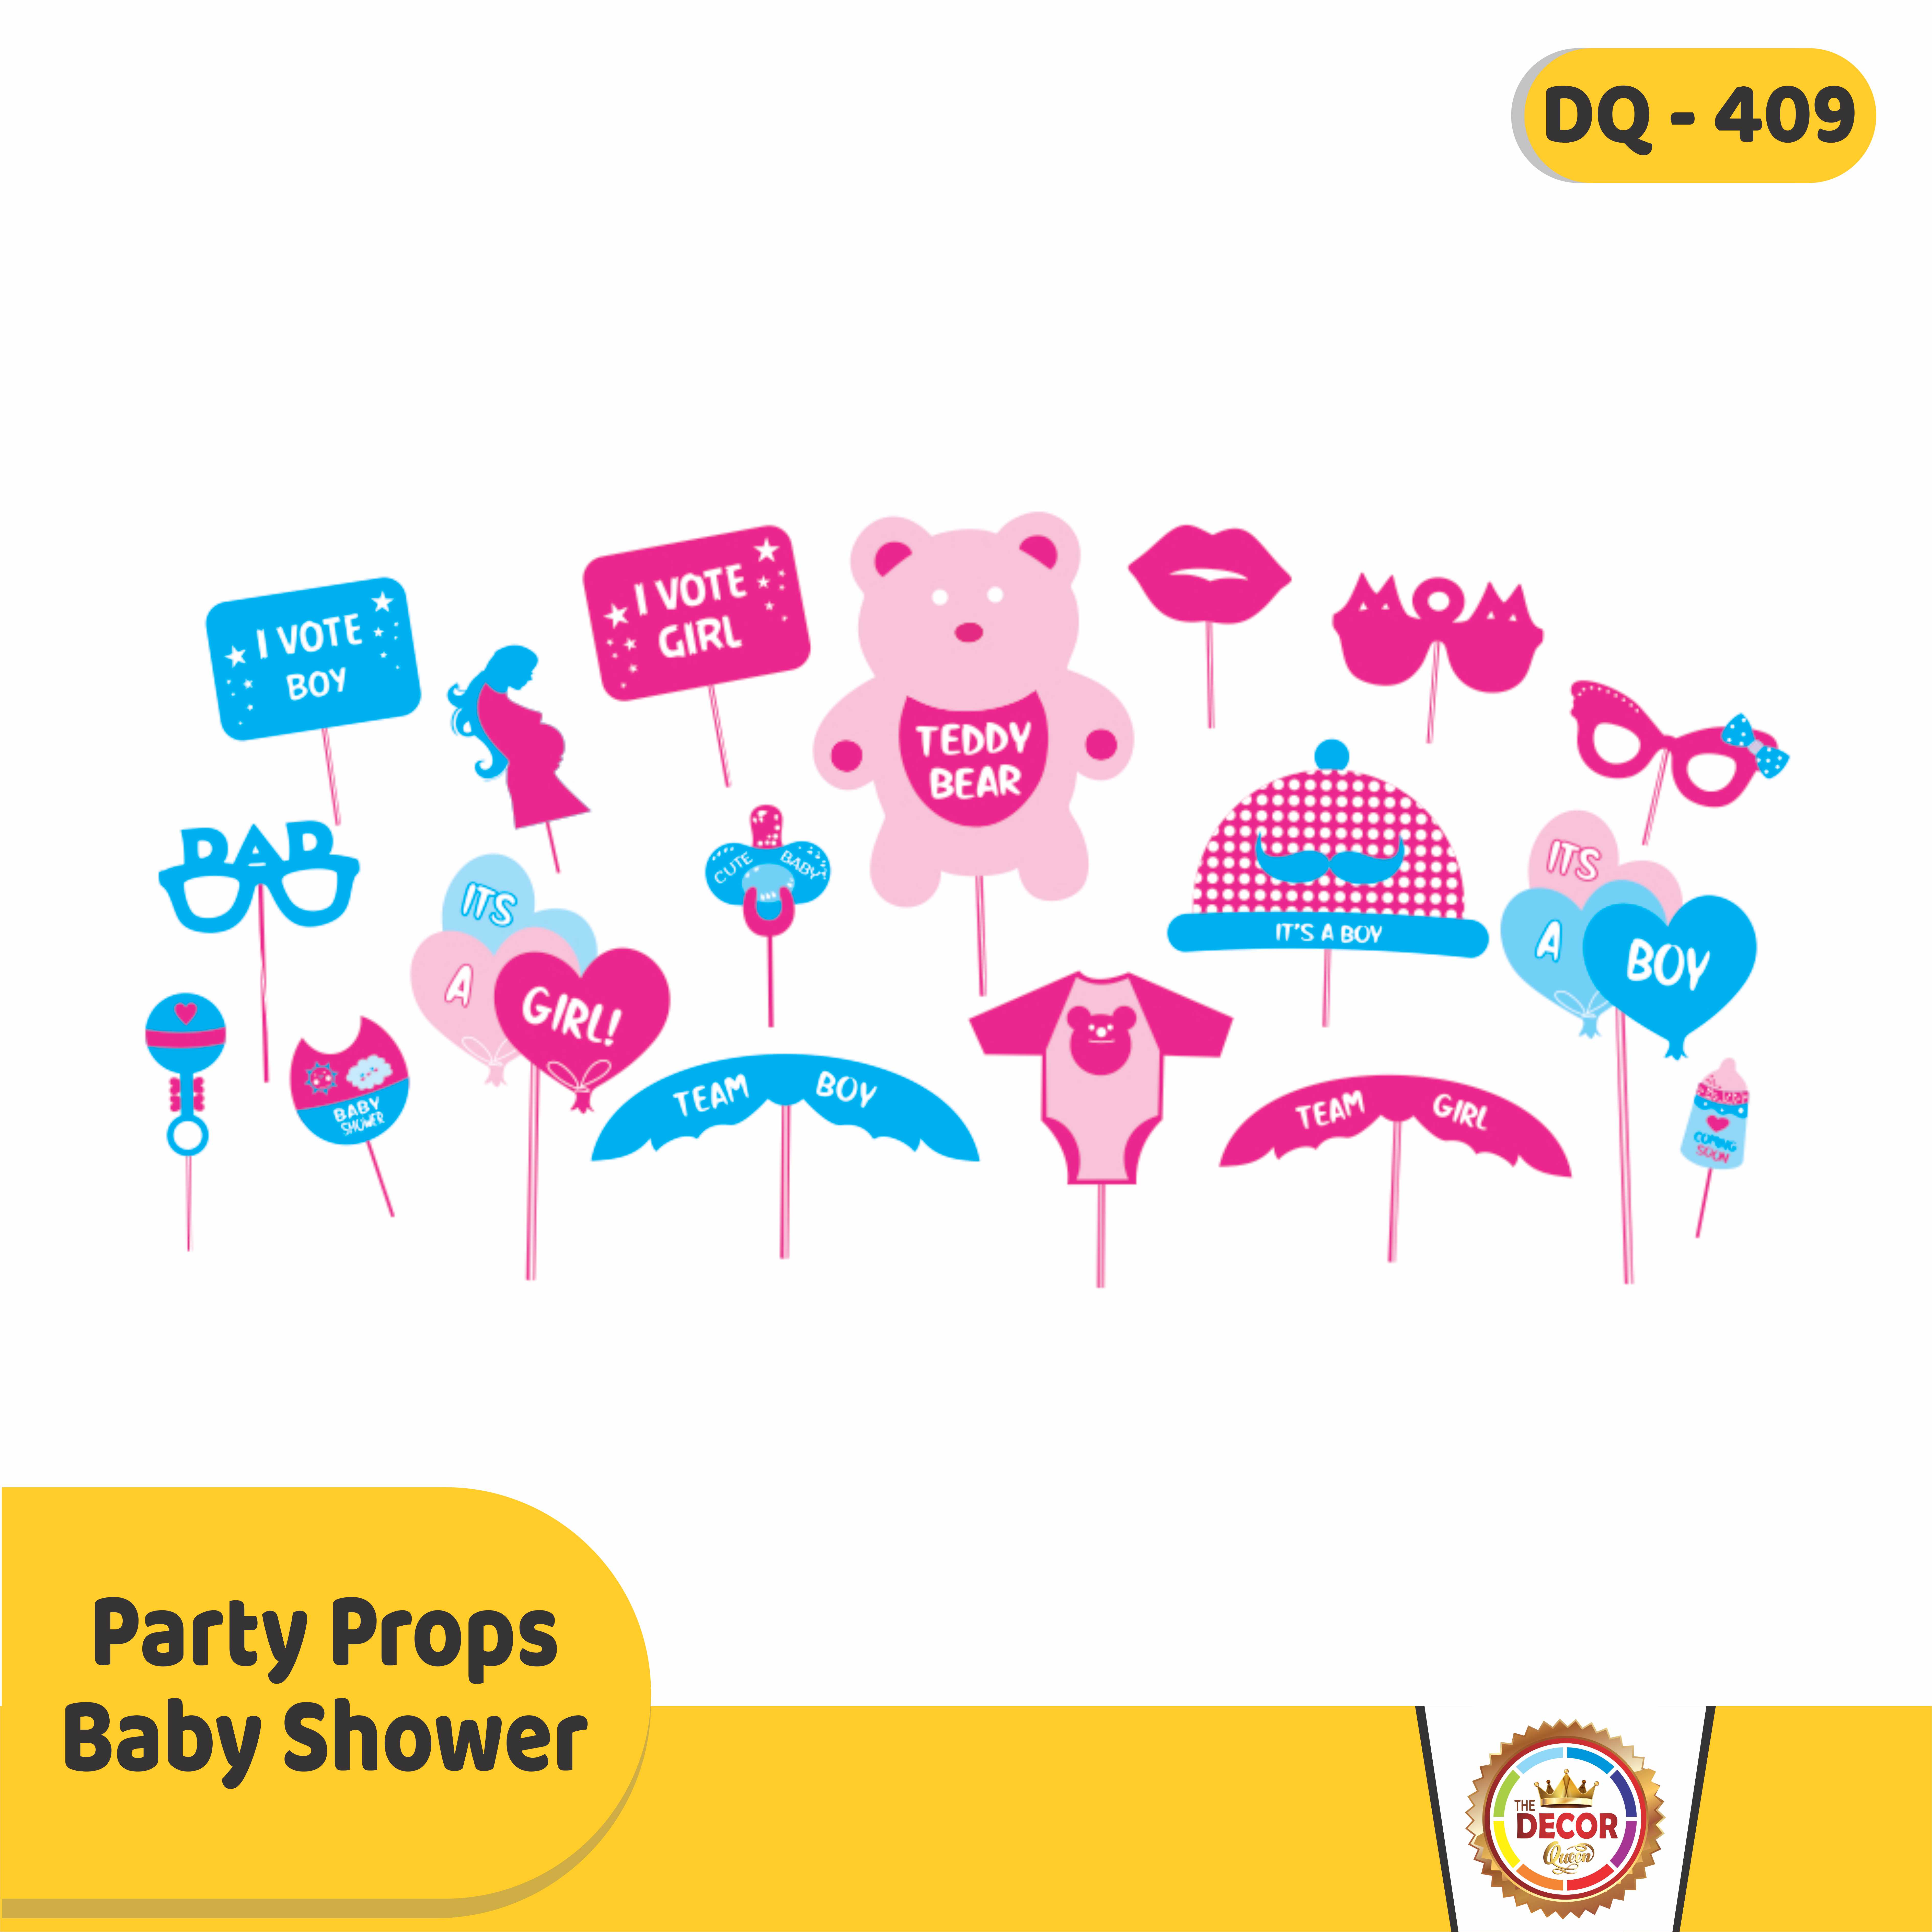 PARTY PROPS BABY SHOWER|Party Products|Party Props